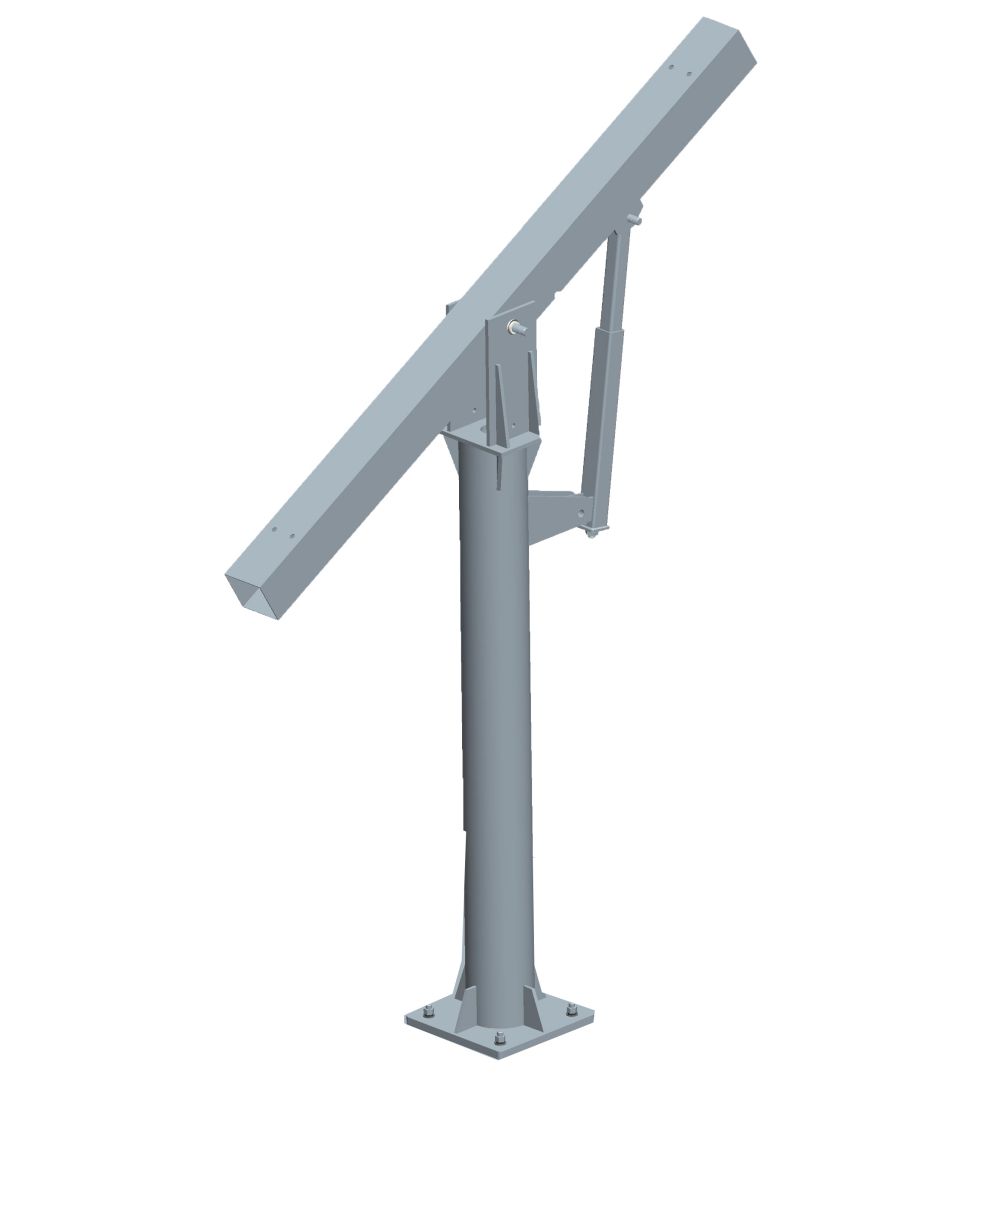 Adjustable tube with beam for solar pv ground mounting system 